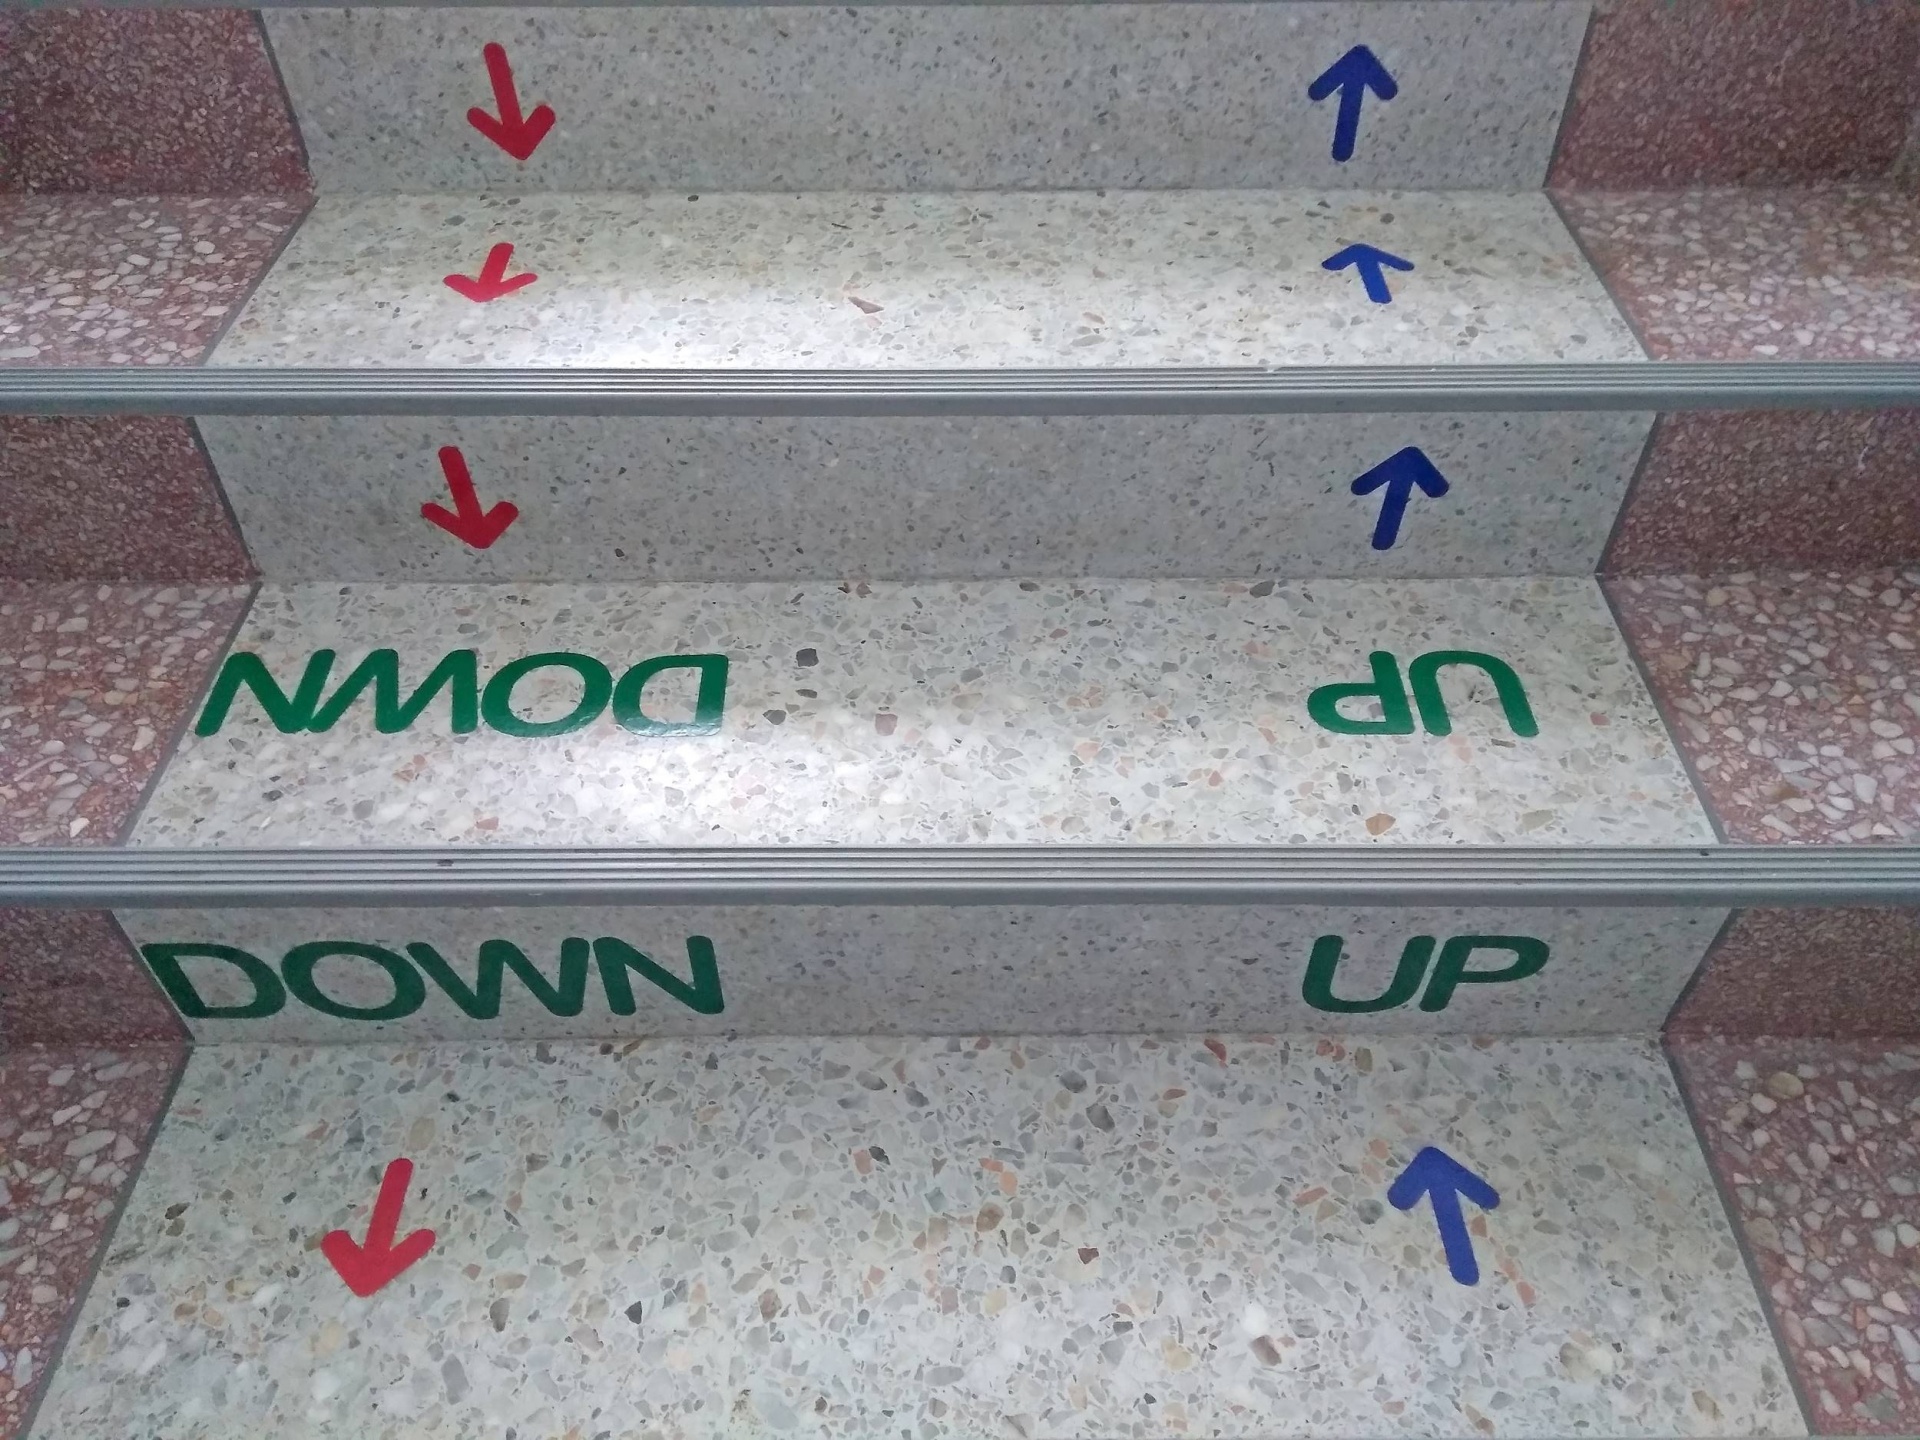 Up and down stairs